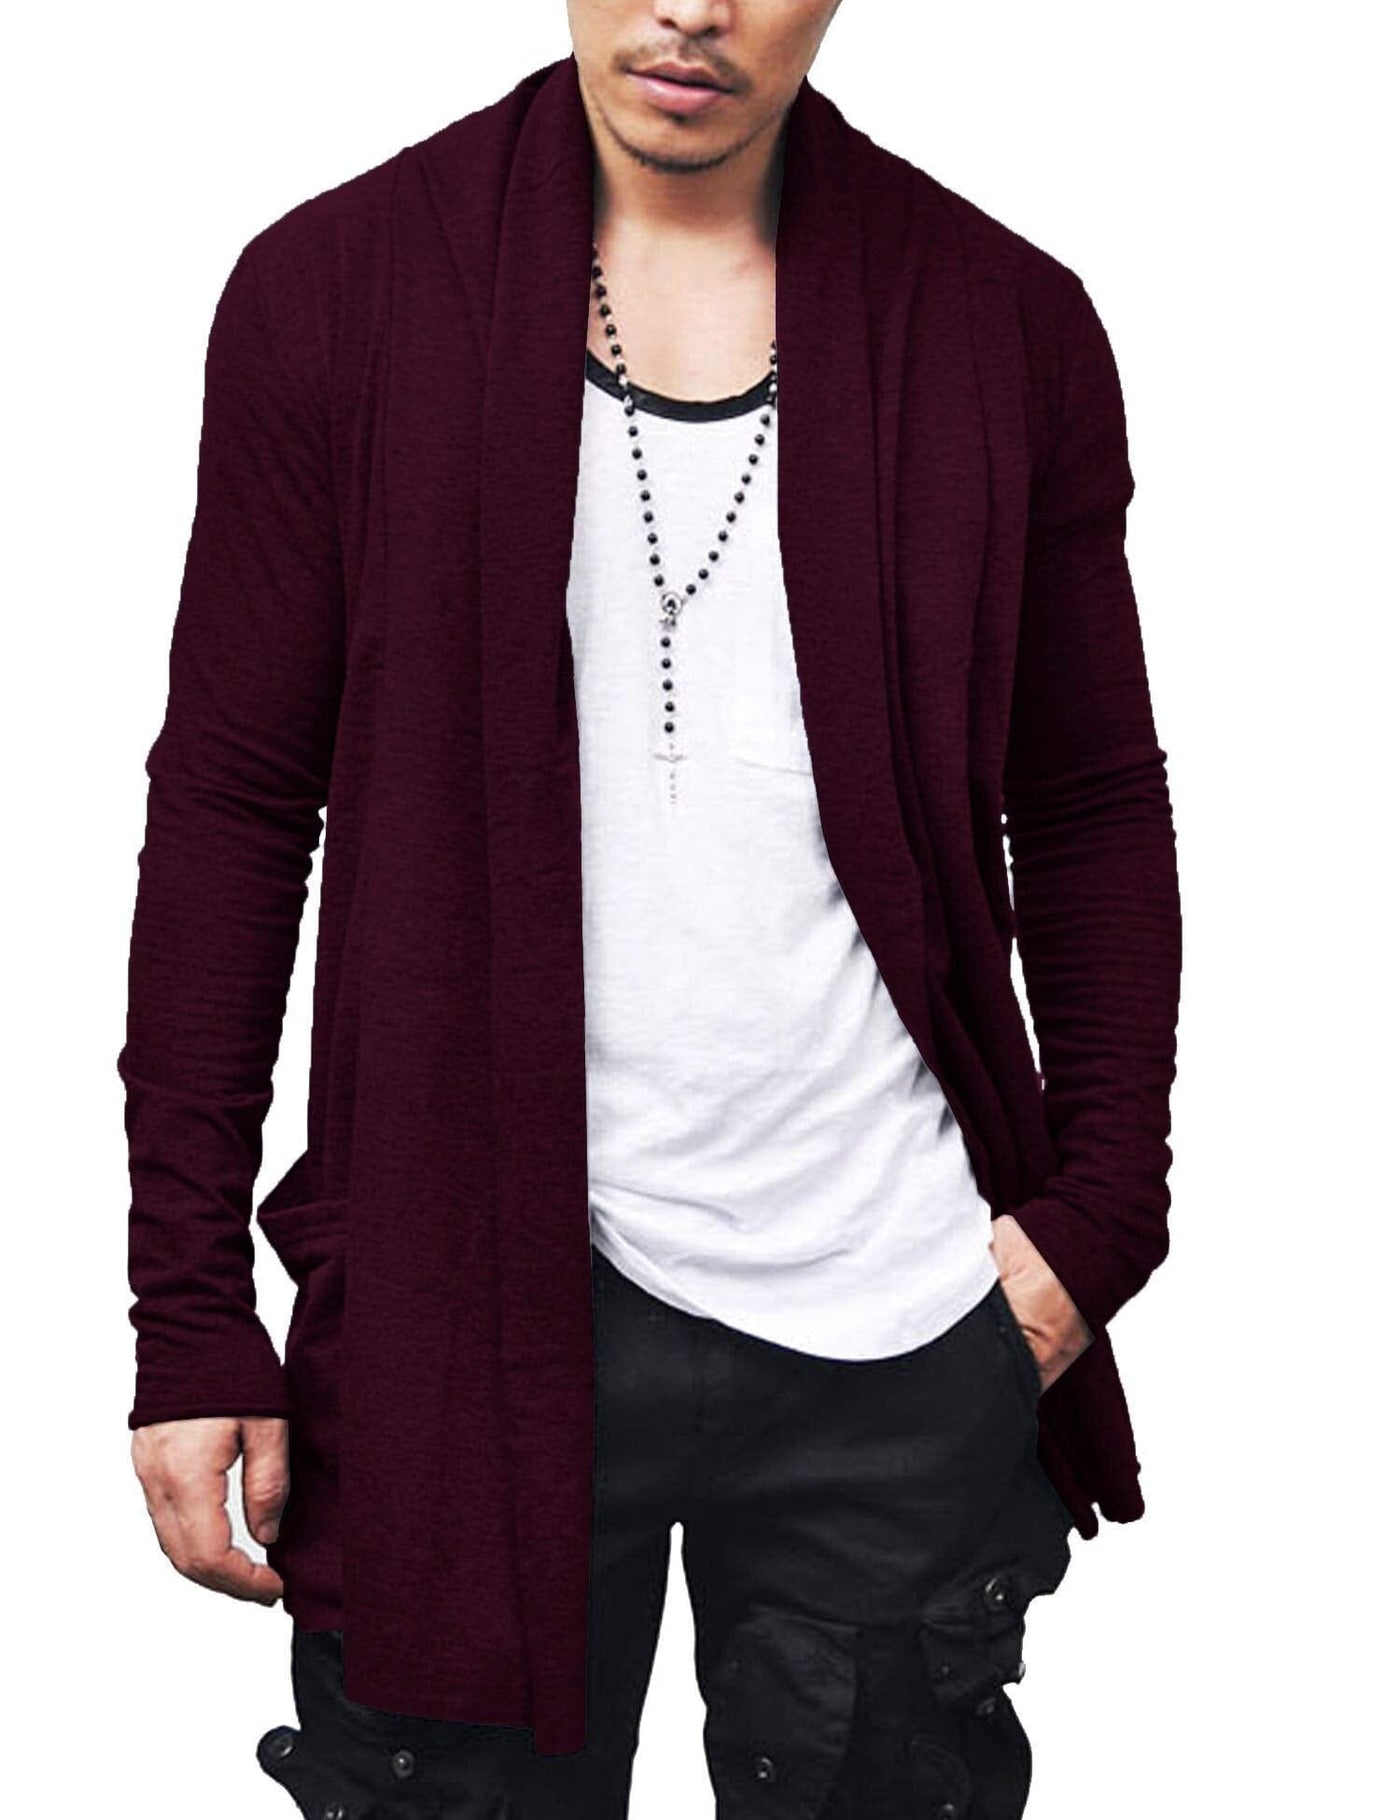 Ruffle Shawl Collar Knitted Cardigan (US Only) Cardigans COOFANDY Store Wine Red M 